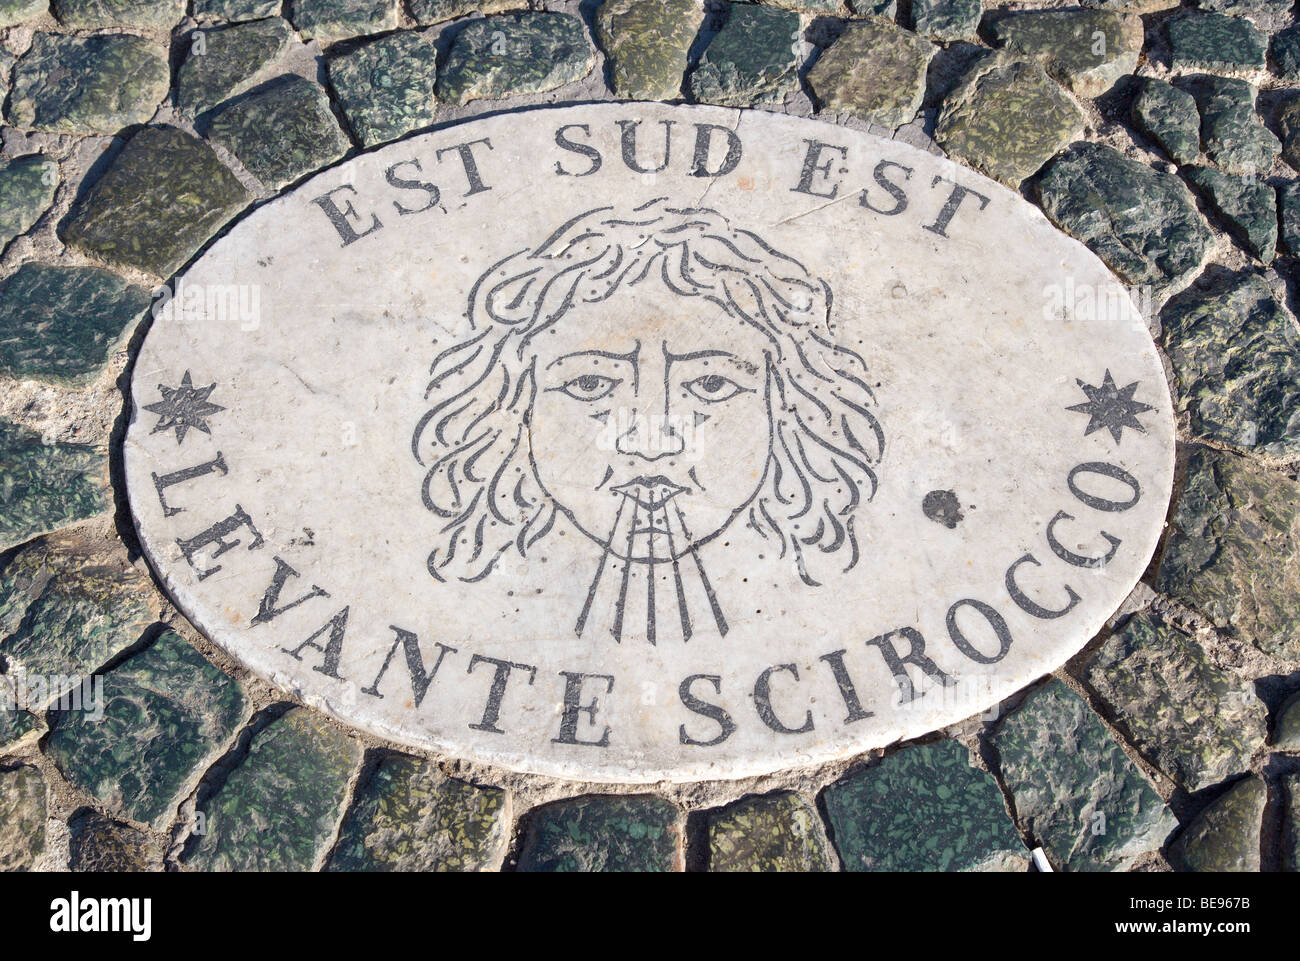 ITALY Lazio Rome Vatican City Plaque in pavement of Piazza San Pietro or St Peter's Square depicting the East South East winds Stock Photo